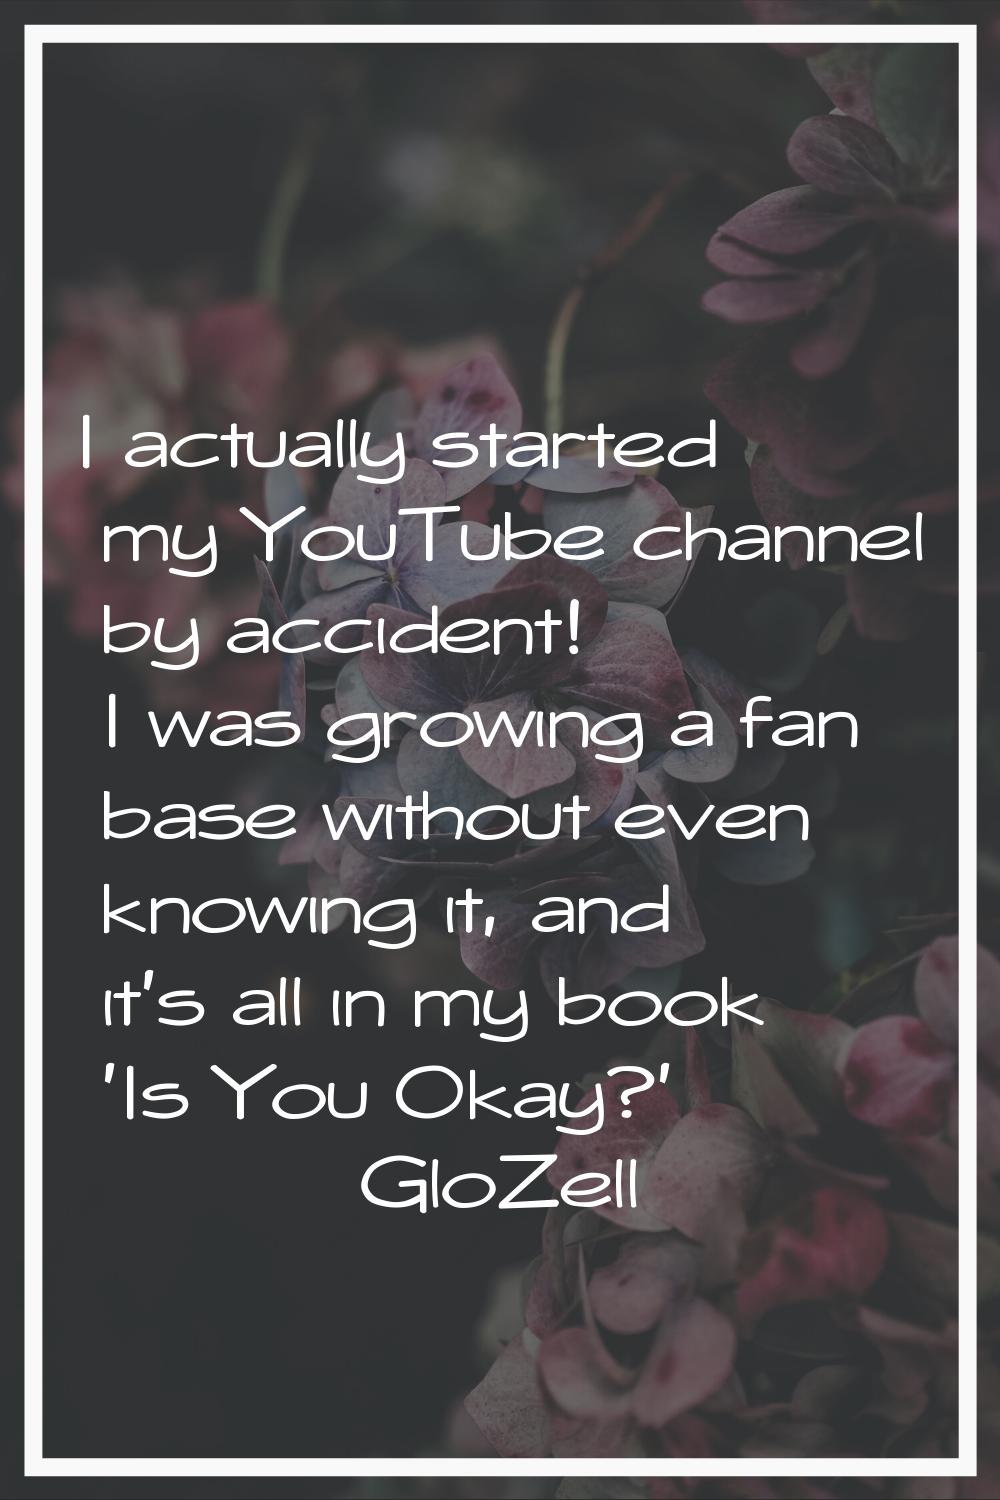 I actually started my YouTube channel by accident! I was growing a fan base without even knowing it